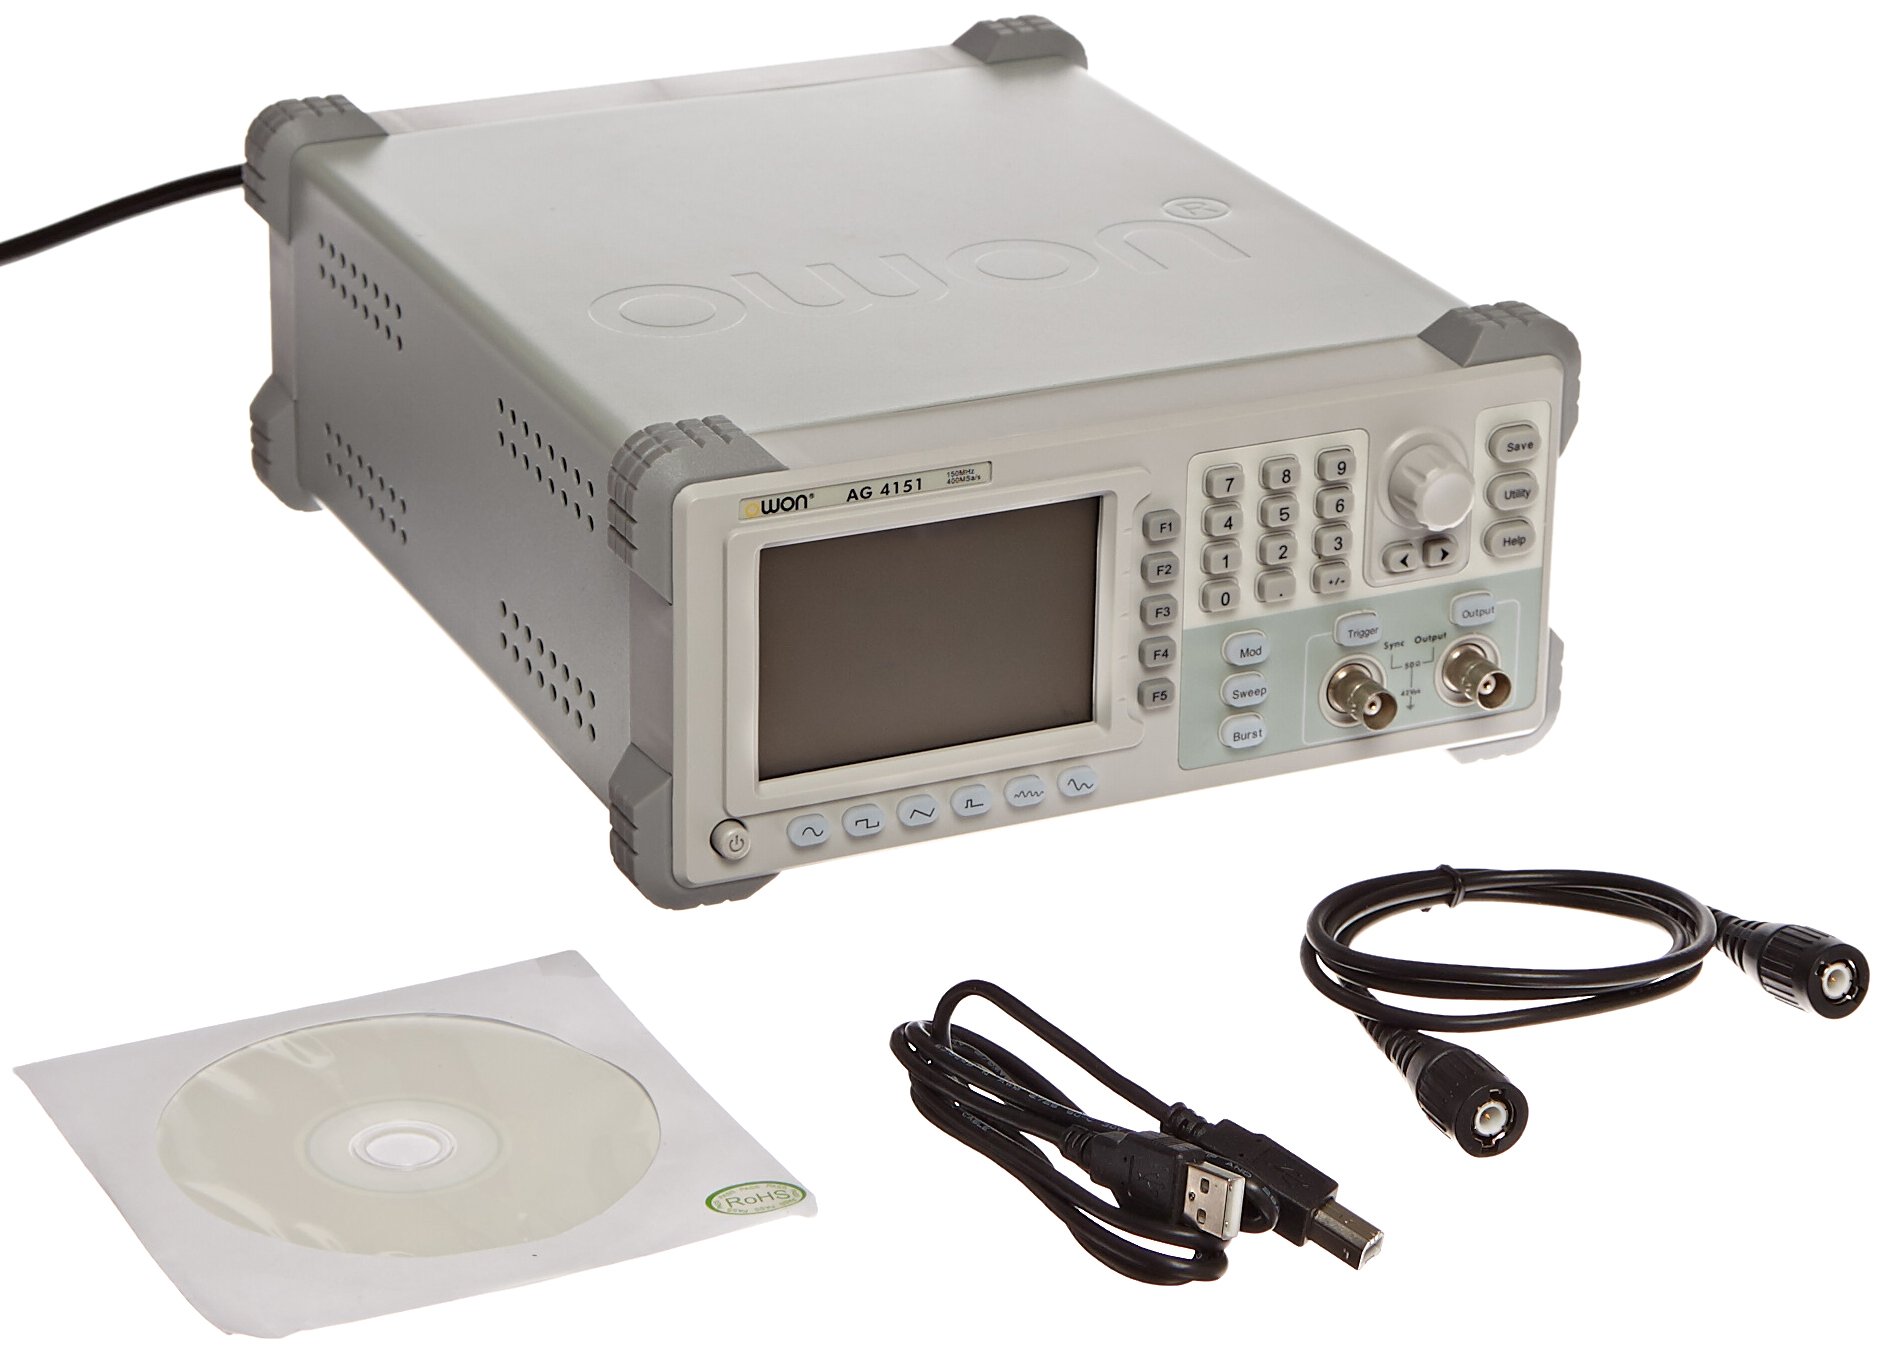 Owon AG4151 Series AG DDS Arbitrary Waveform Generator, 1 Channel, 150MHz, 400MSa/S Sample Rate